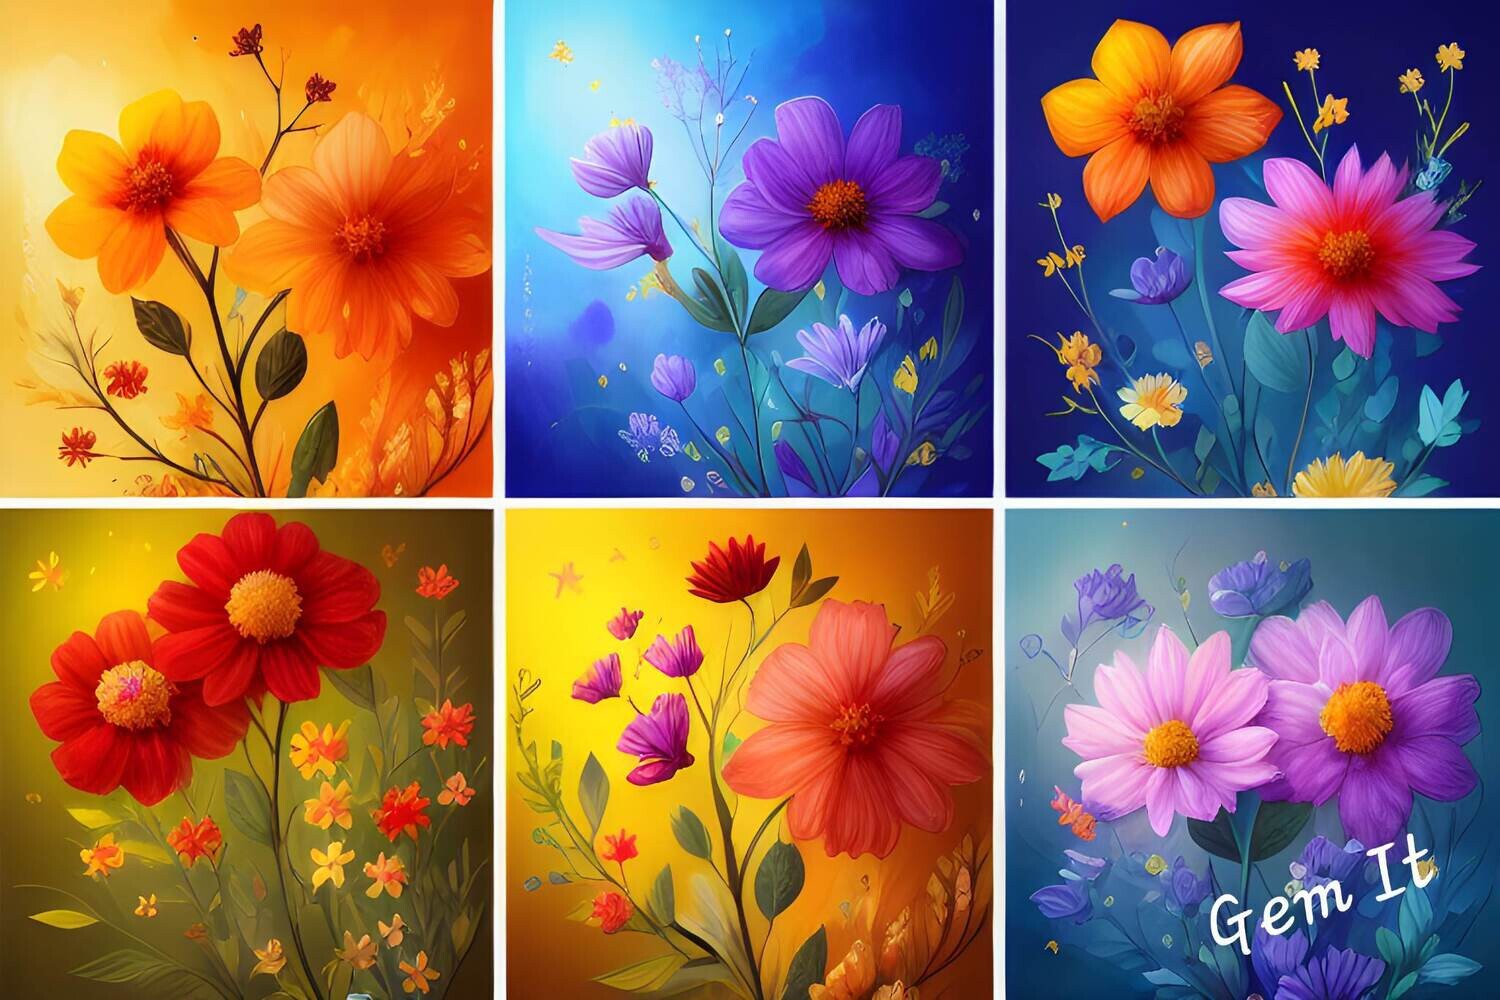 Flower Collage 821 - Specially ordered for you. Delivery is approximately 4 - 6 weeks.